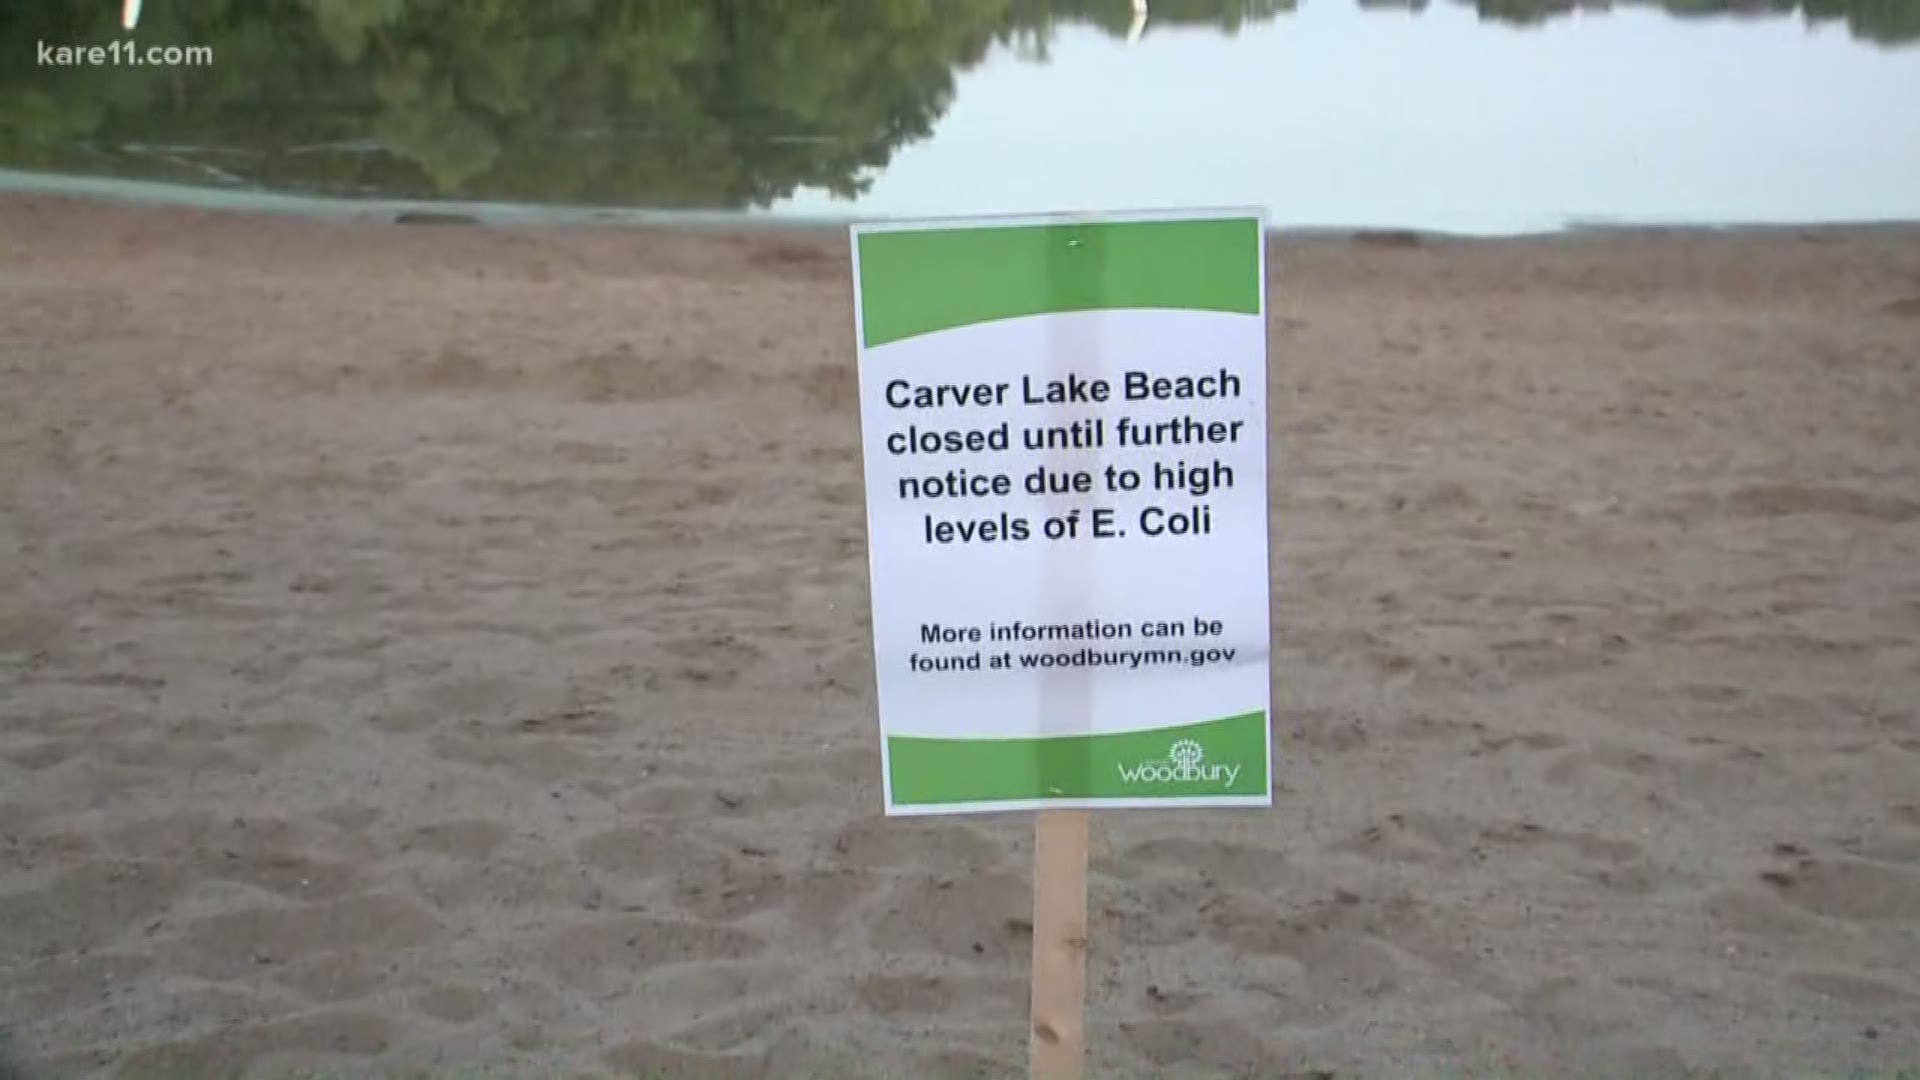 The City of Woodbury says Carver Lake Beach is closed after routine testing found E. coli in Carver Lake. https://kare11.tv/2GrIS2d